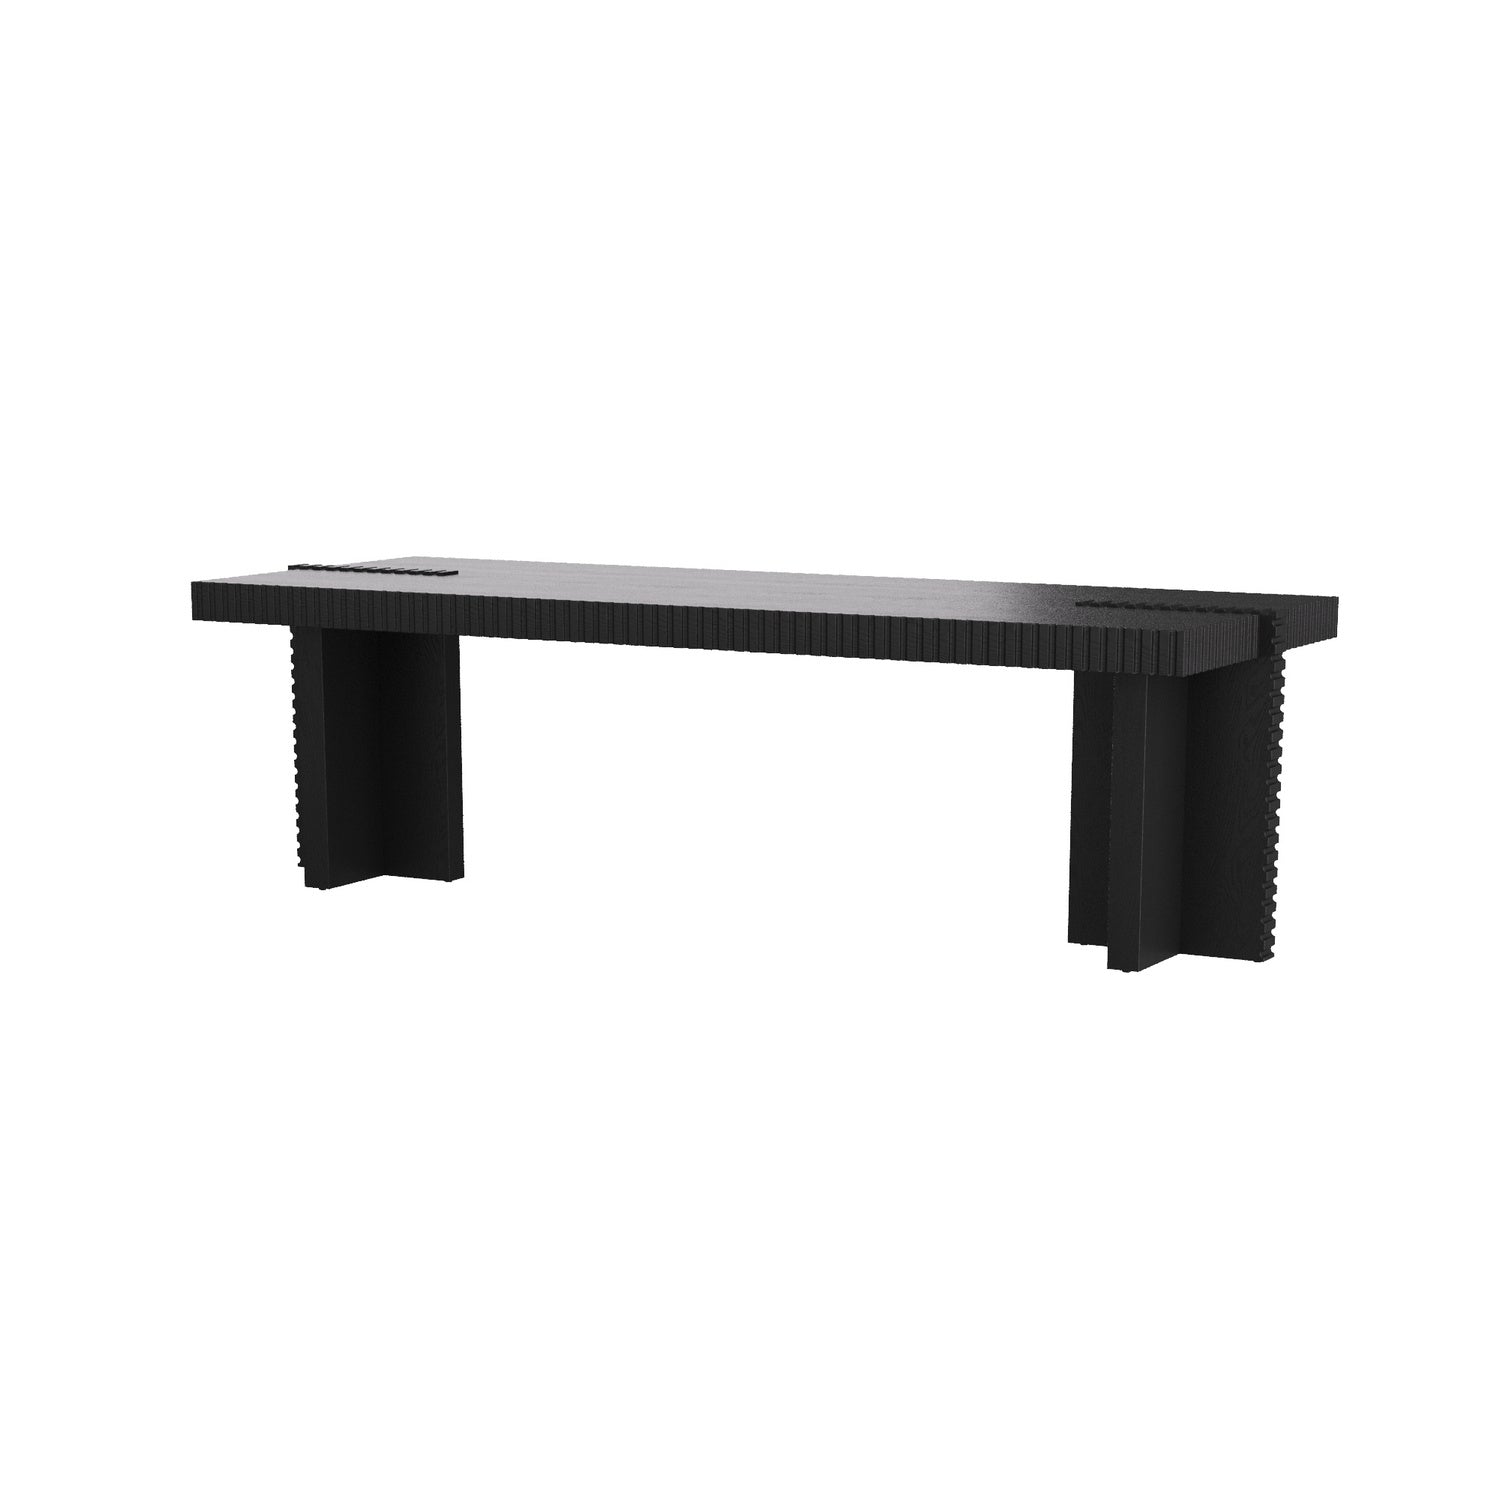 Bench from the Pacorro collection in Ebony finish